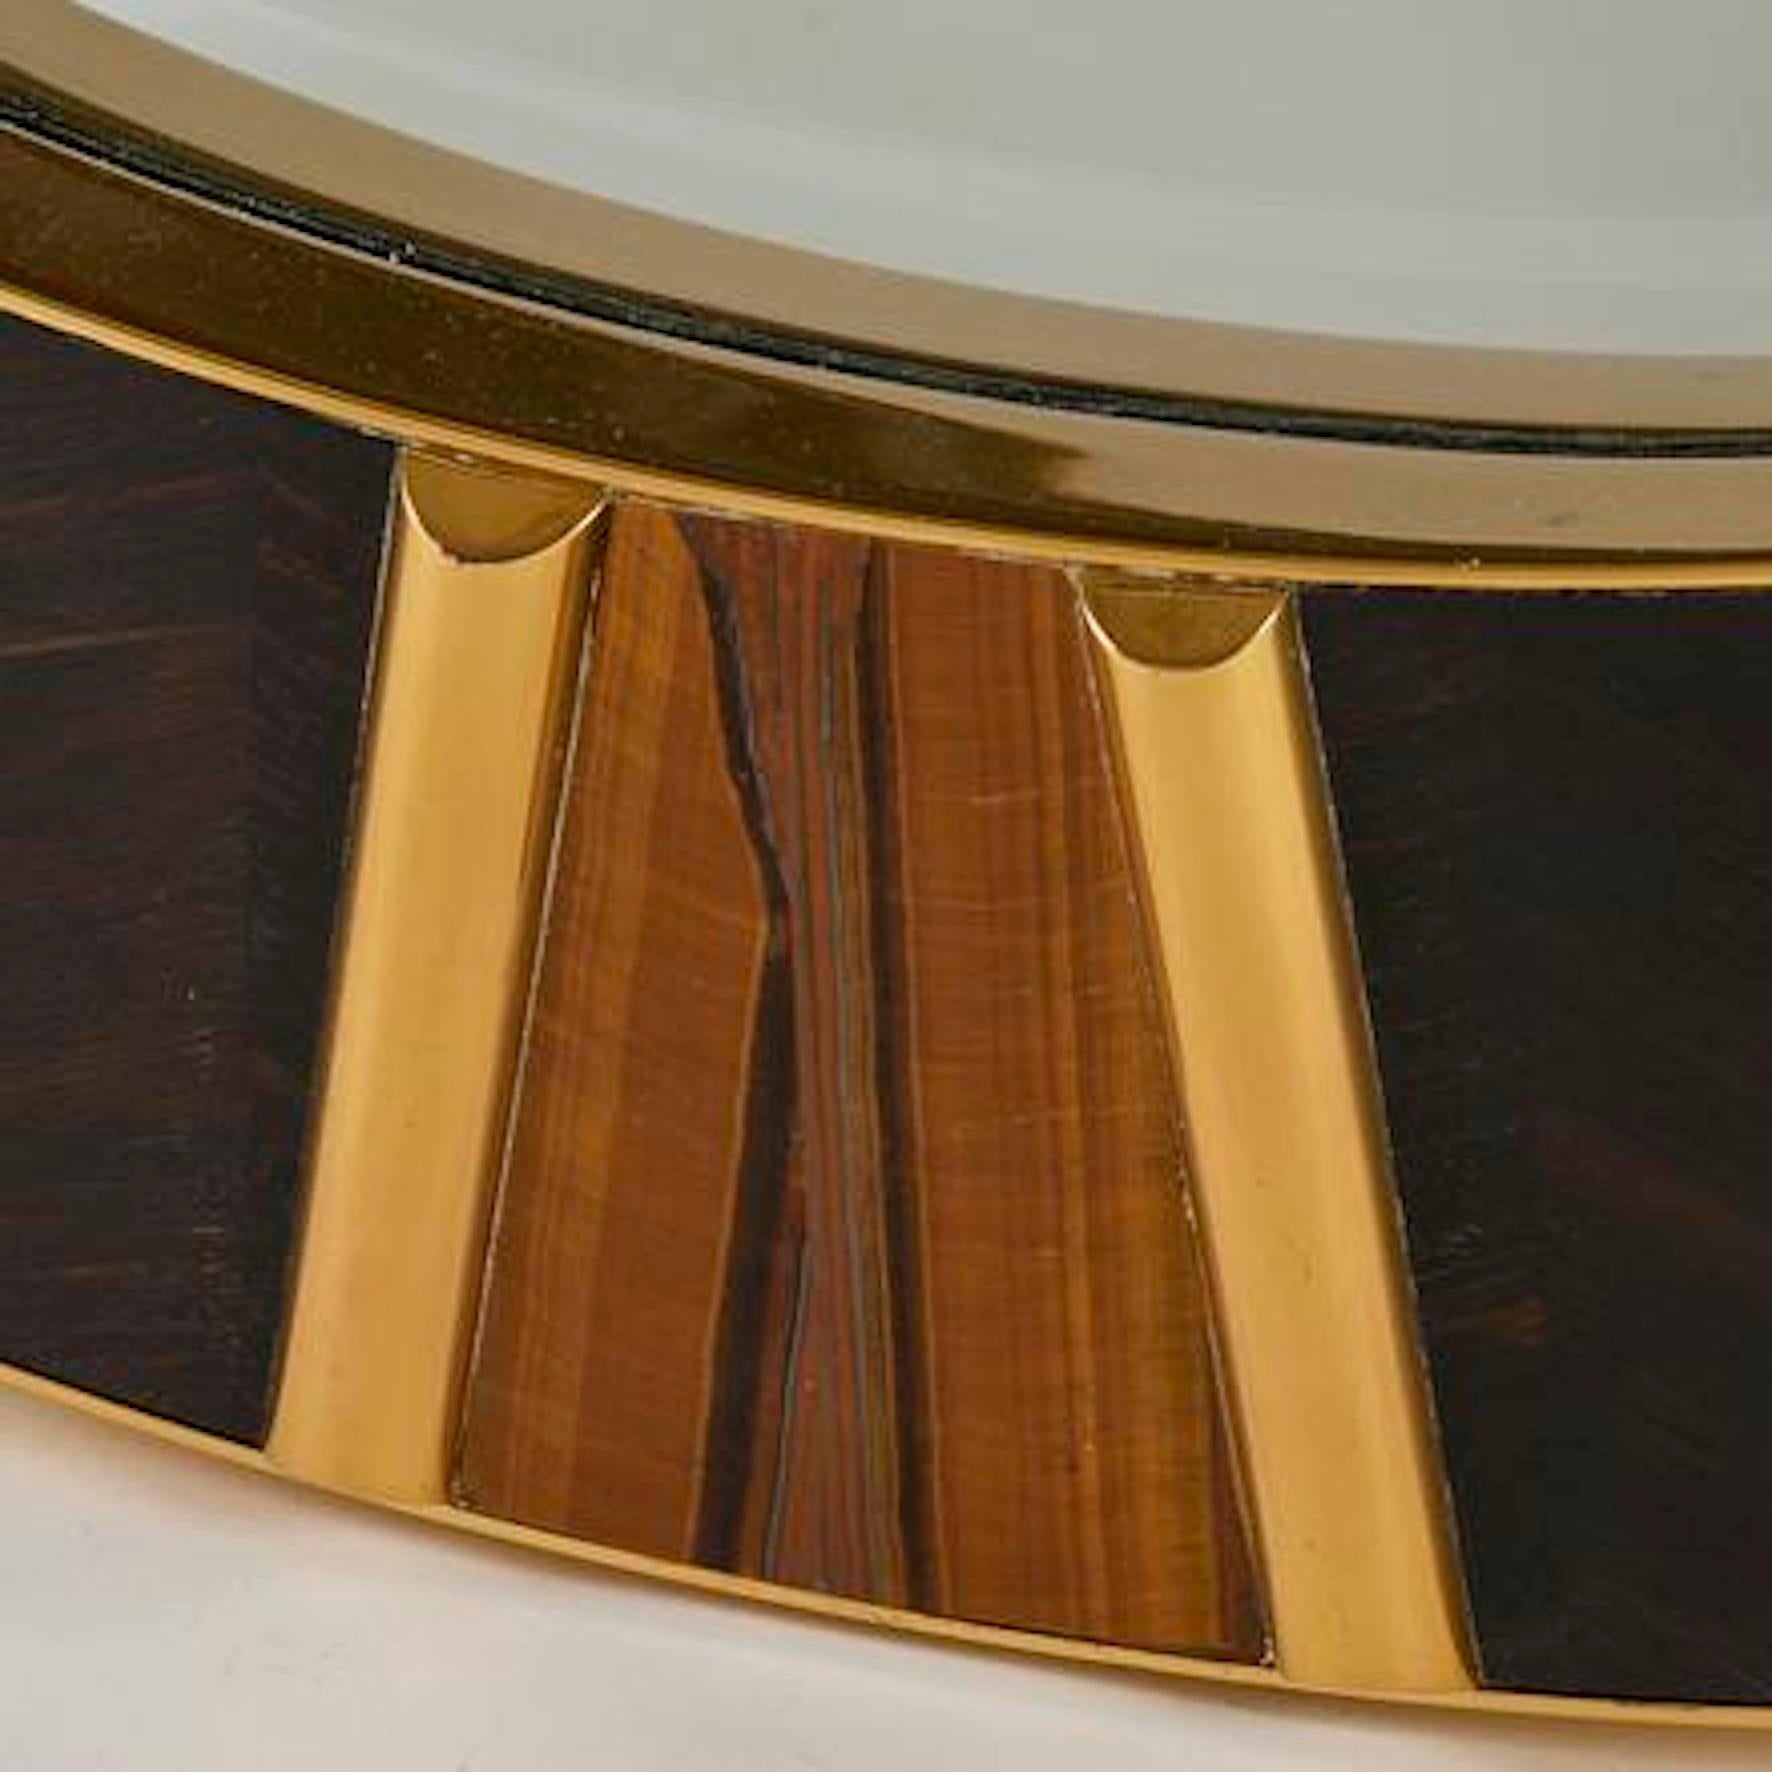 Important Modernist Circular Mirror Inlaid with Tiger Eye Stone Details In Good Condition For Sale In Montreal, QC